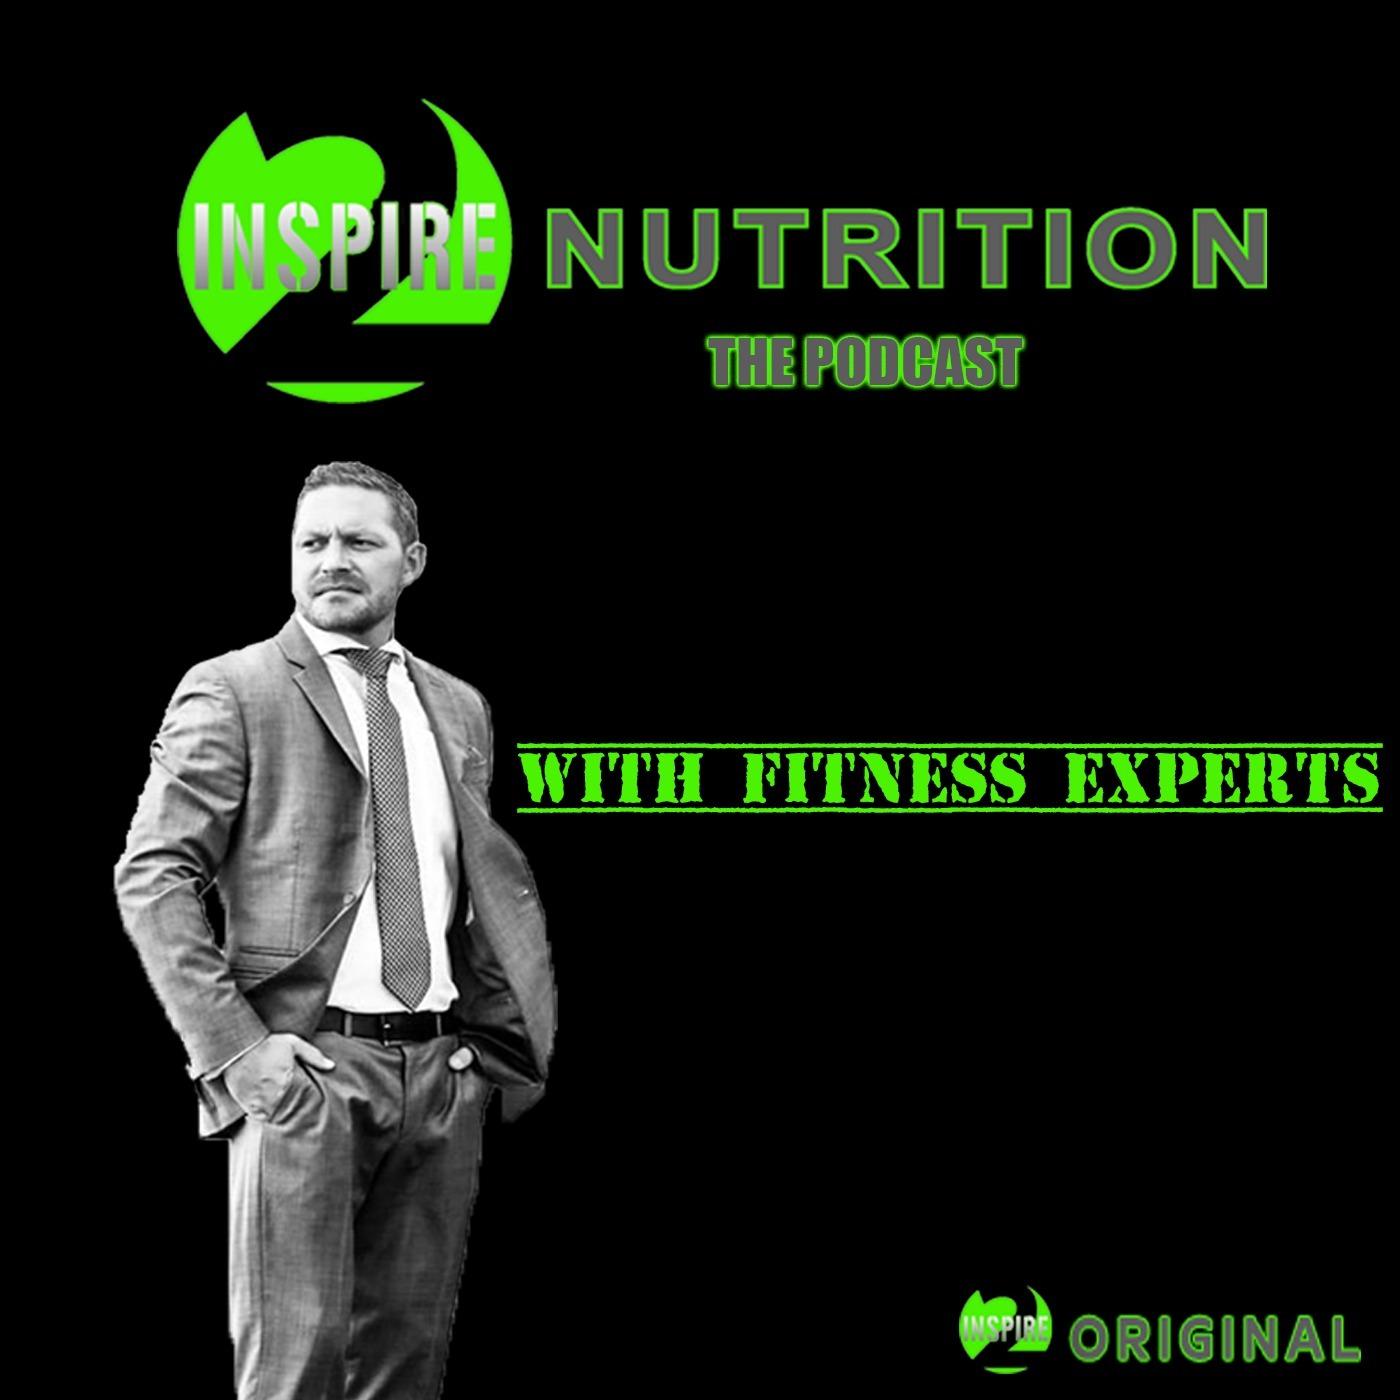 2Inspire Nutrition: The Podcast